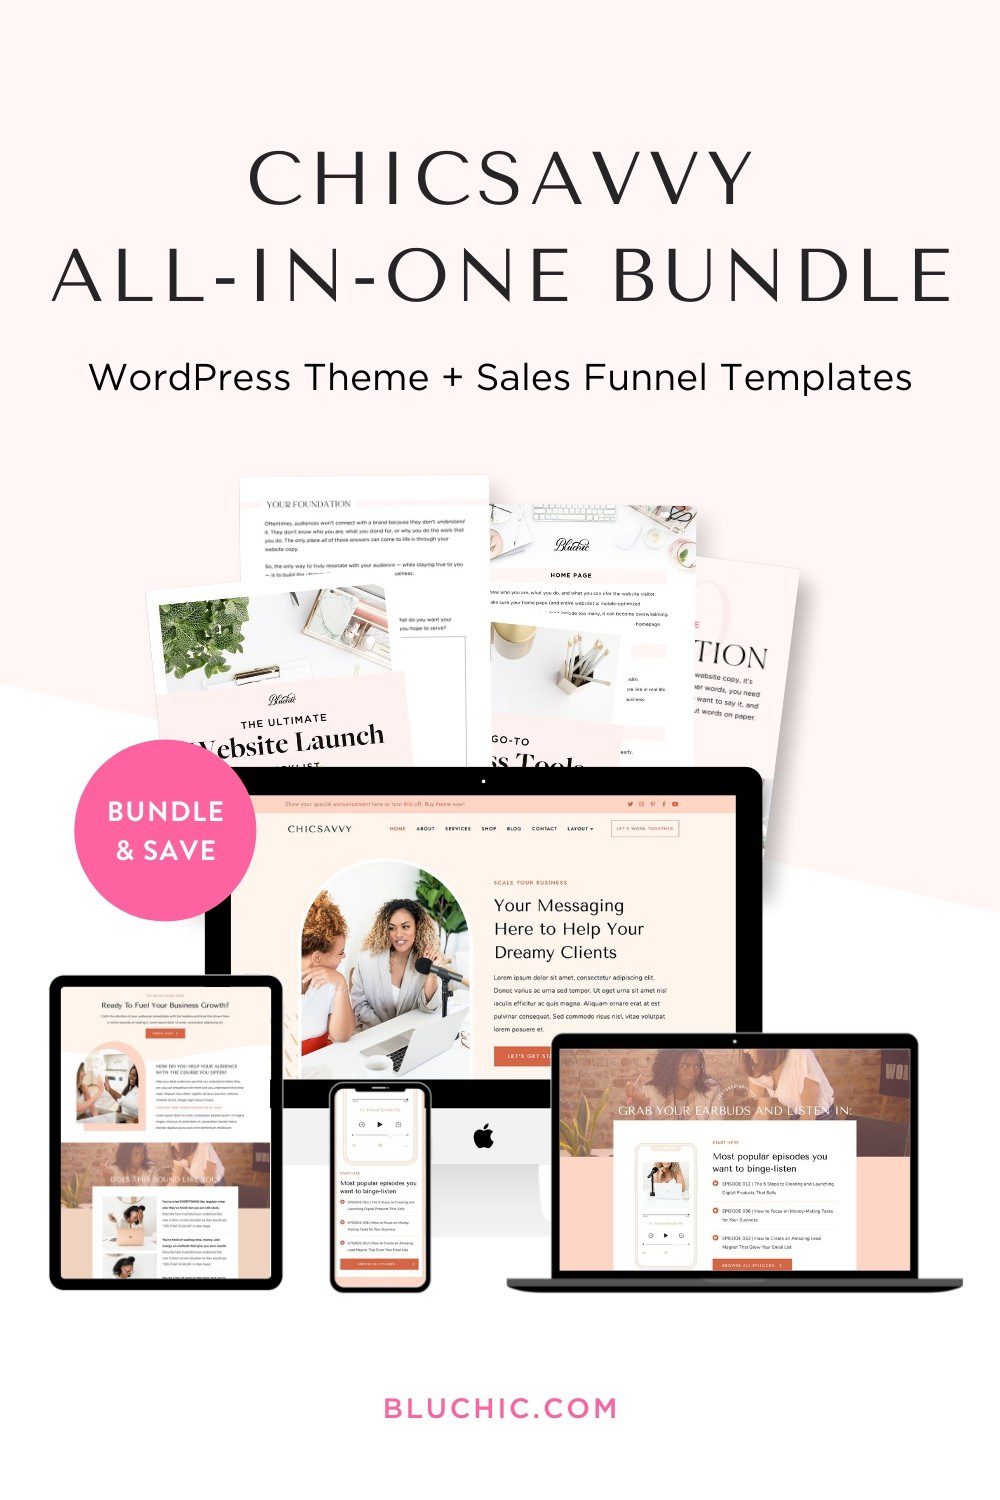 ChickSavvy All-in-One Bundle